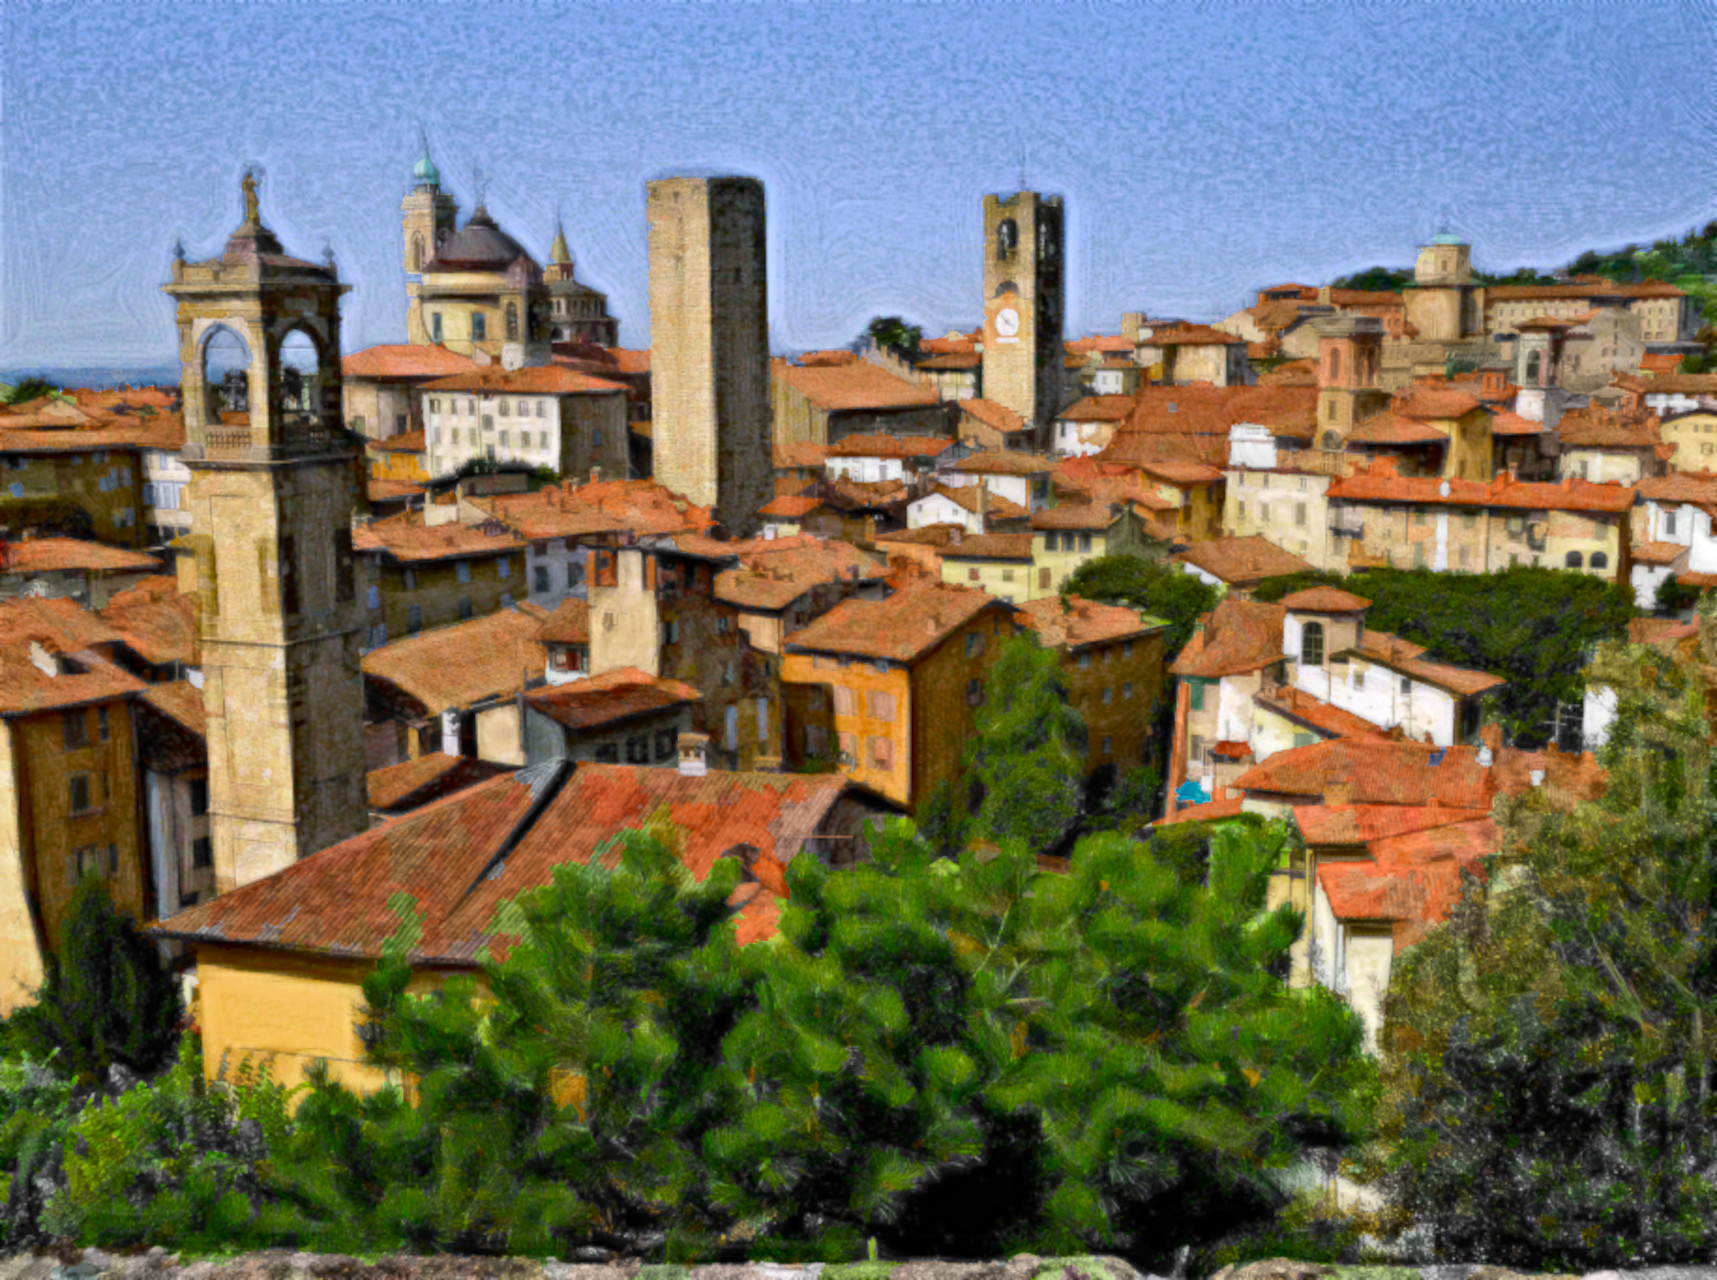 2022-04-11 16-56-03bergamo_by_sergiba_d77swu3-fullview Paint  with Couleurs Rayees 2 (Effect Look fine).jpeg